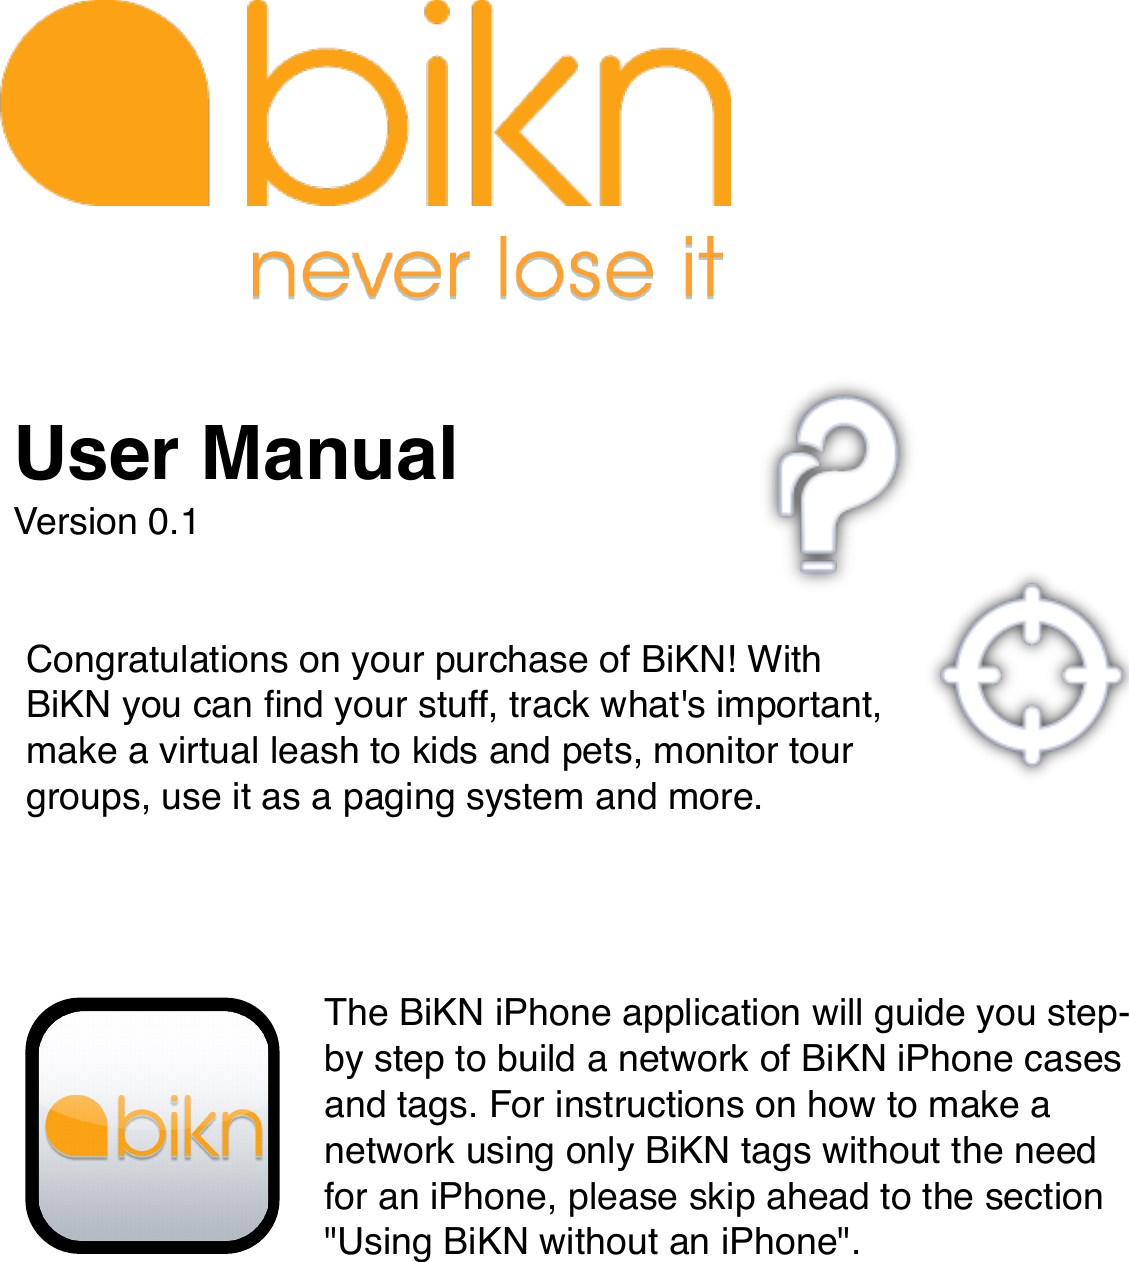 Congratulations on your purchase of BiKN! With BiKN you can ﬁnd your stuff, track what&apos;s important, make a virtual leash to kids and pets, monitor tour groups, use it as a paging system and more.The BiKN iPhone application will guide you step-by step to build a network of BiKN iPhone cases and tags. For instructions on how to make a network using only BiKN tags without the need for an iPhone, please skip ahead to the section &quot;Using BiKN without an iPhone&quot;.User ManualVersion 0.1